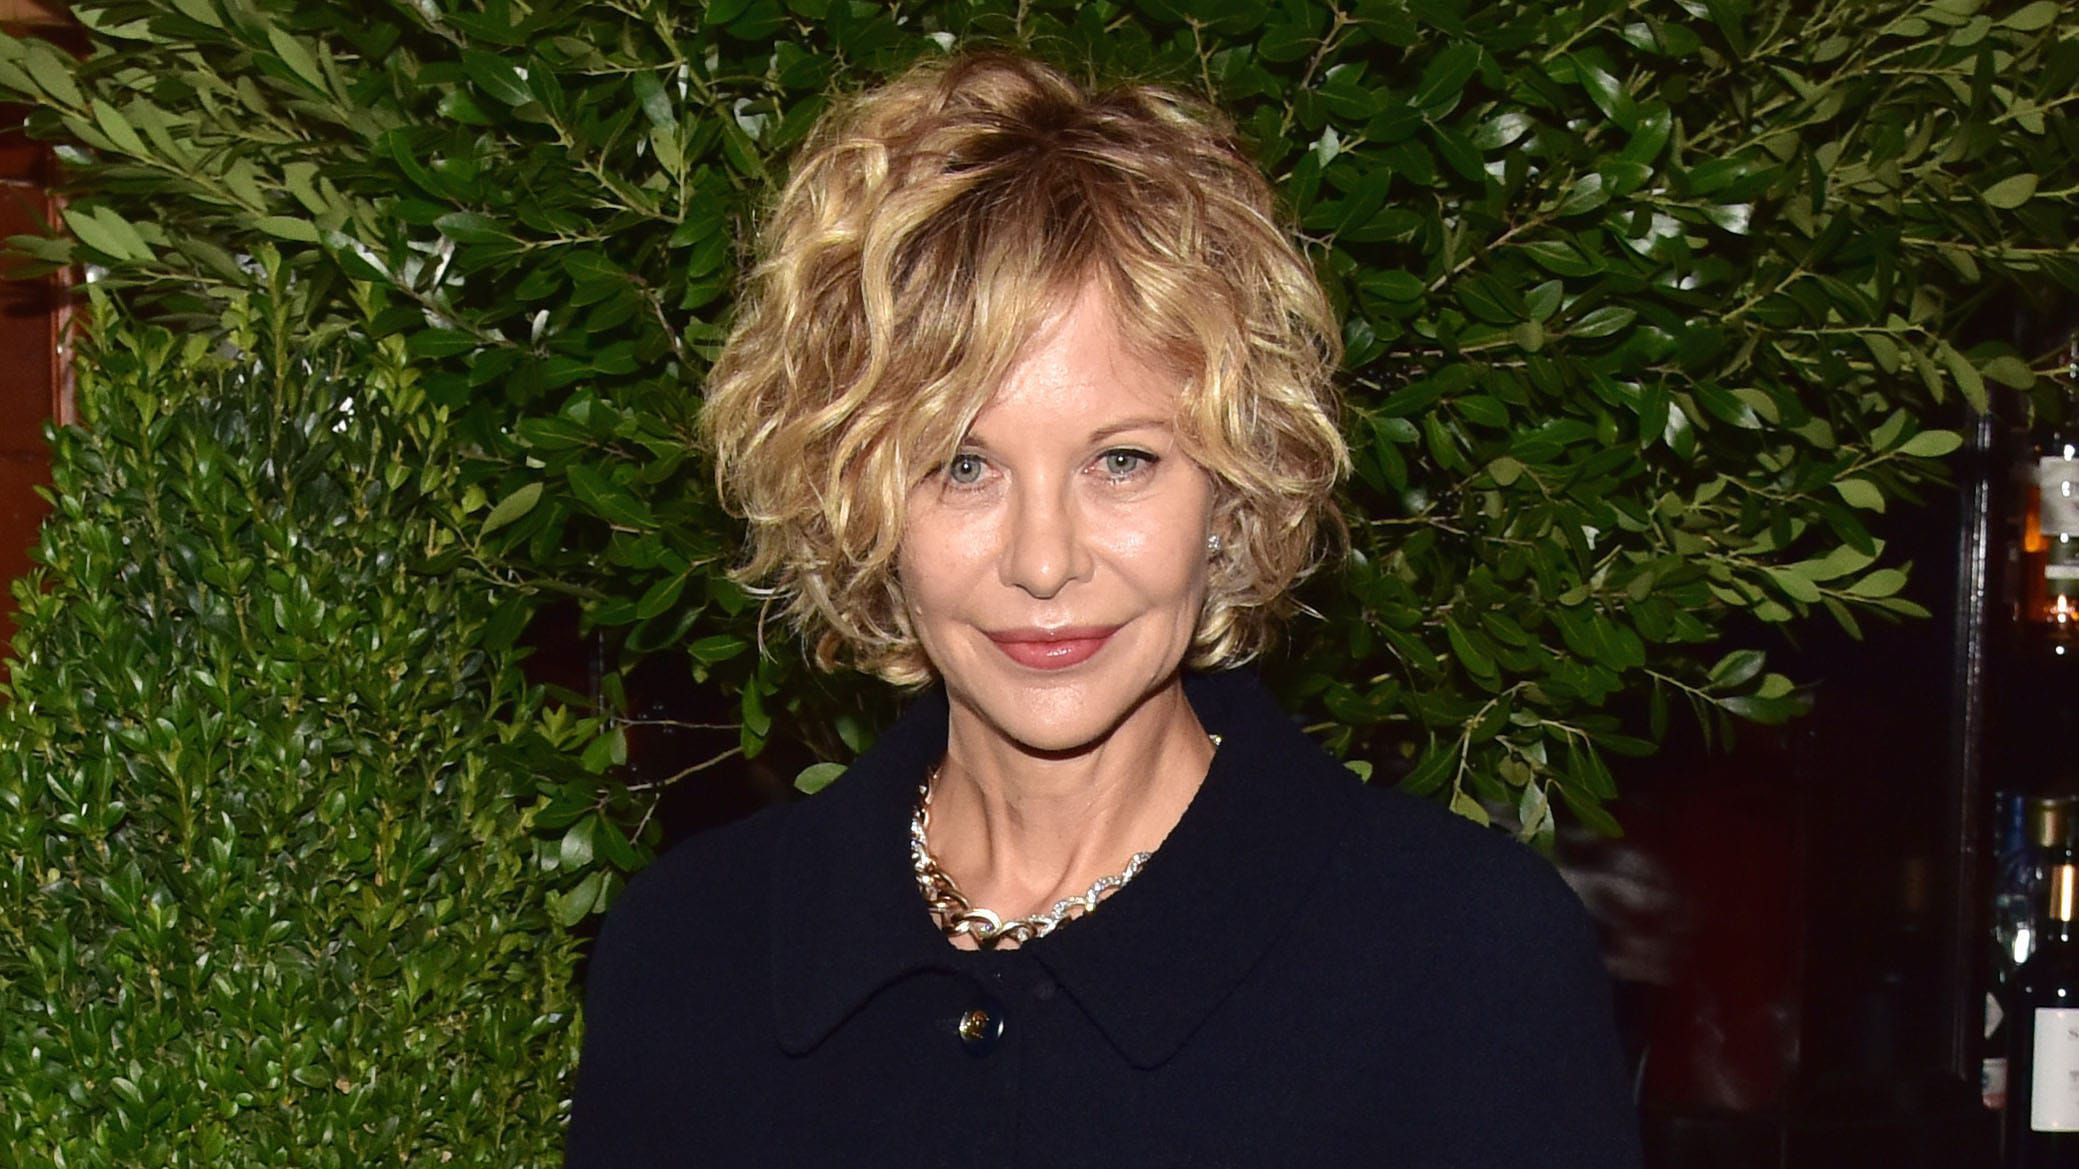 Meg Ryan Wallpapers Images Photos Pictures Backgrounds